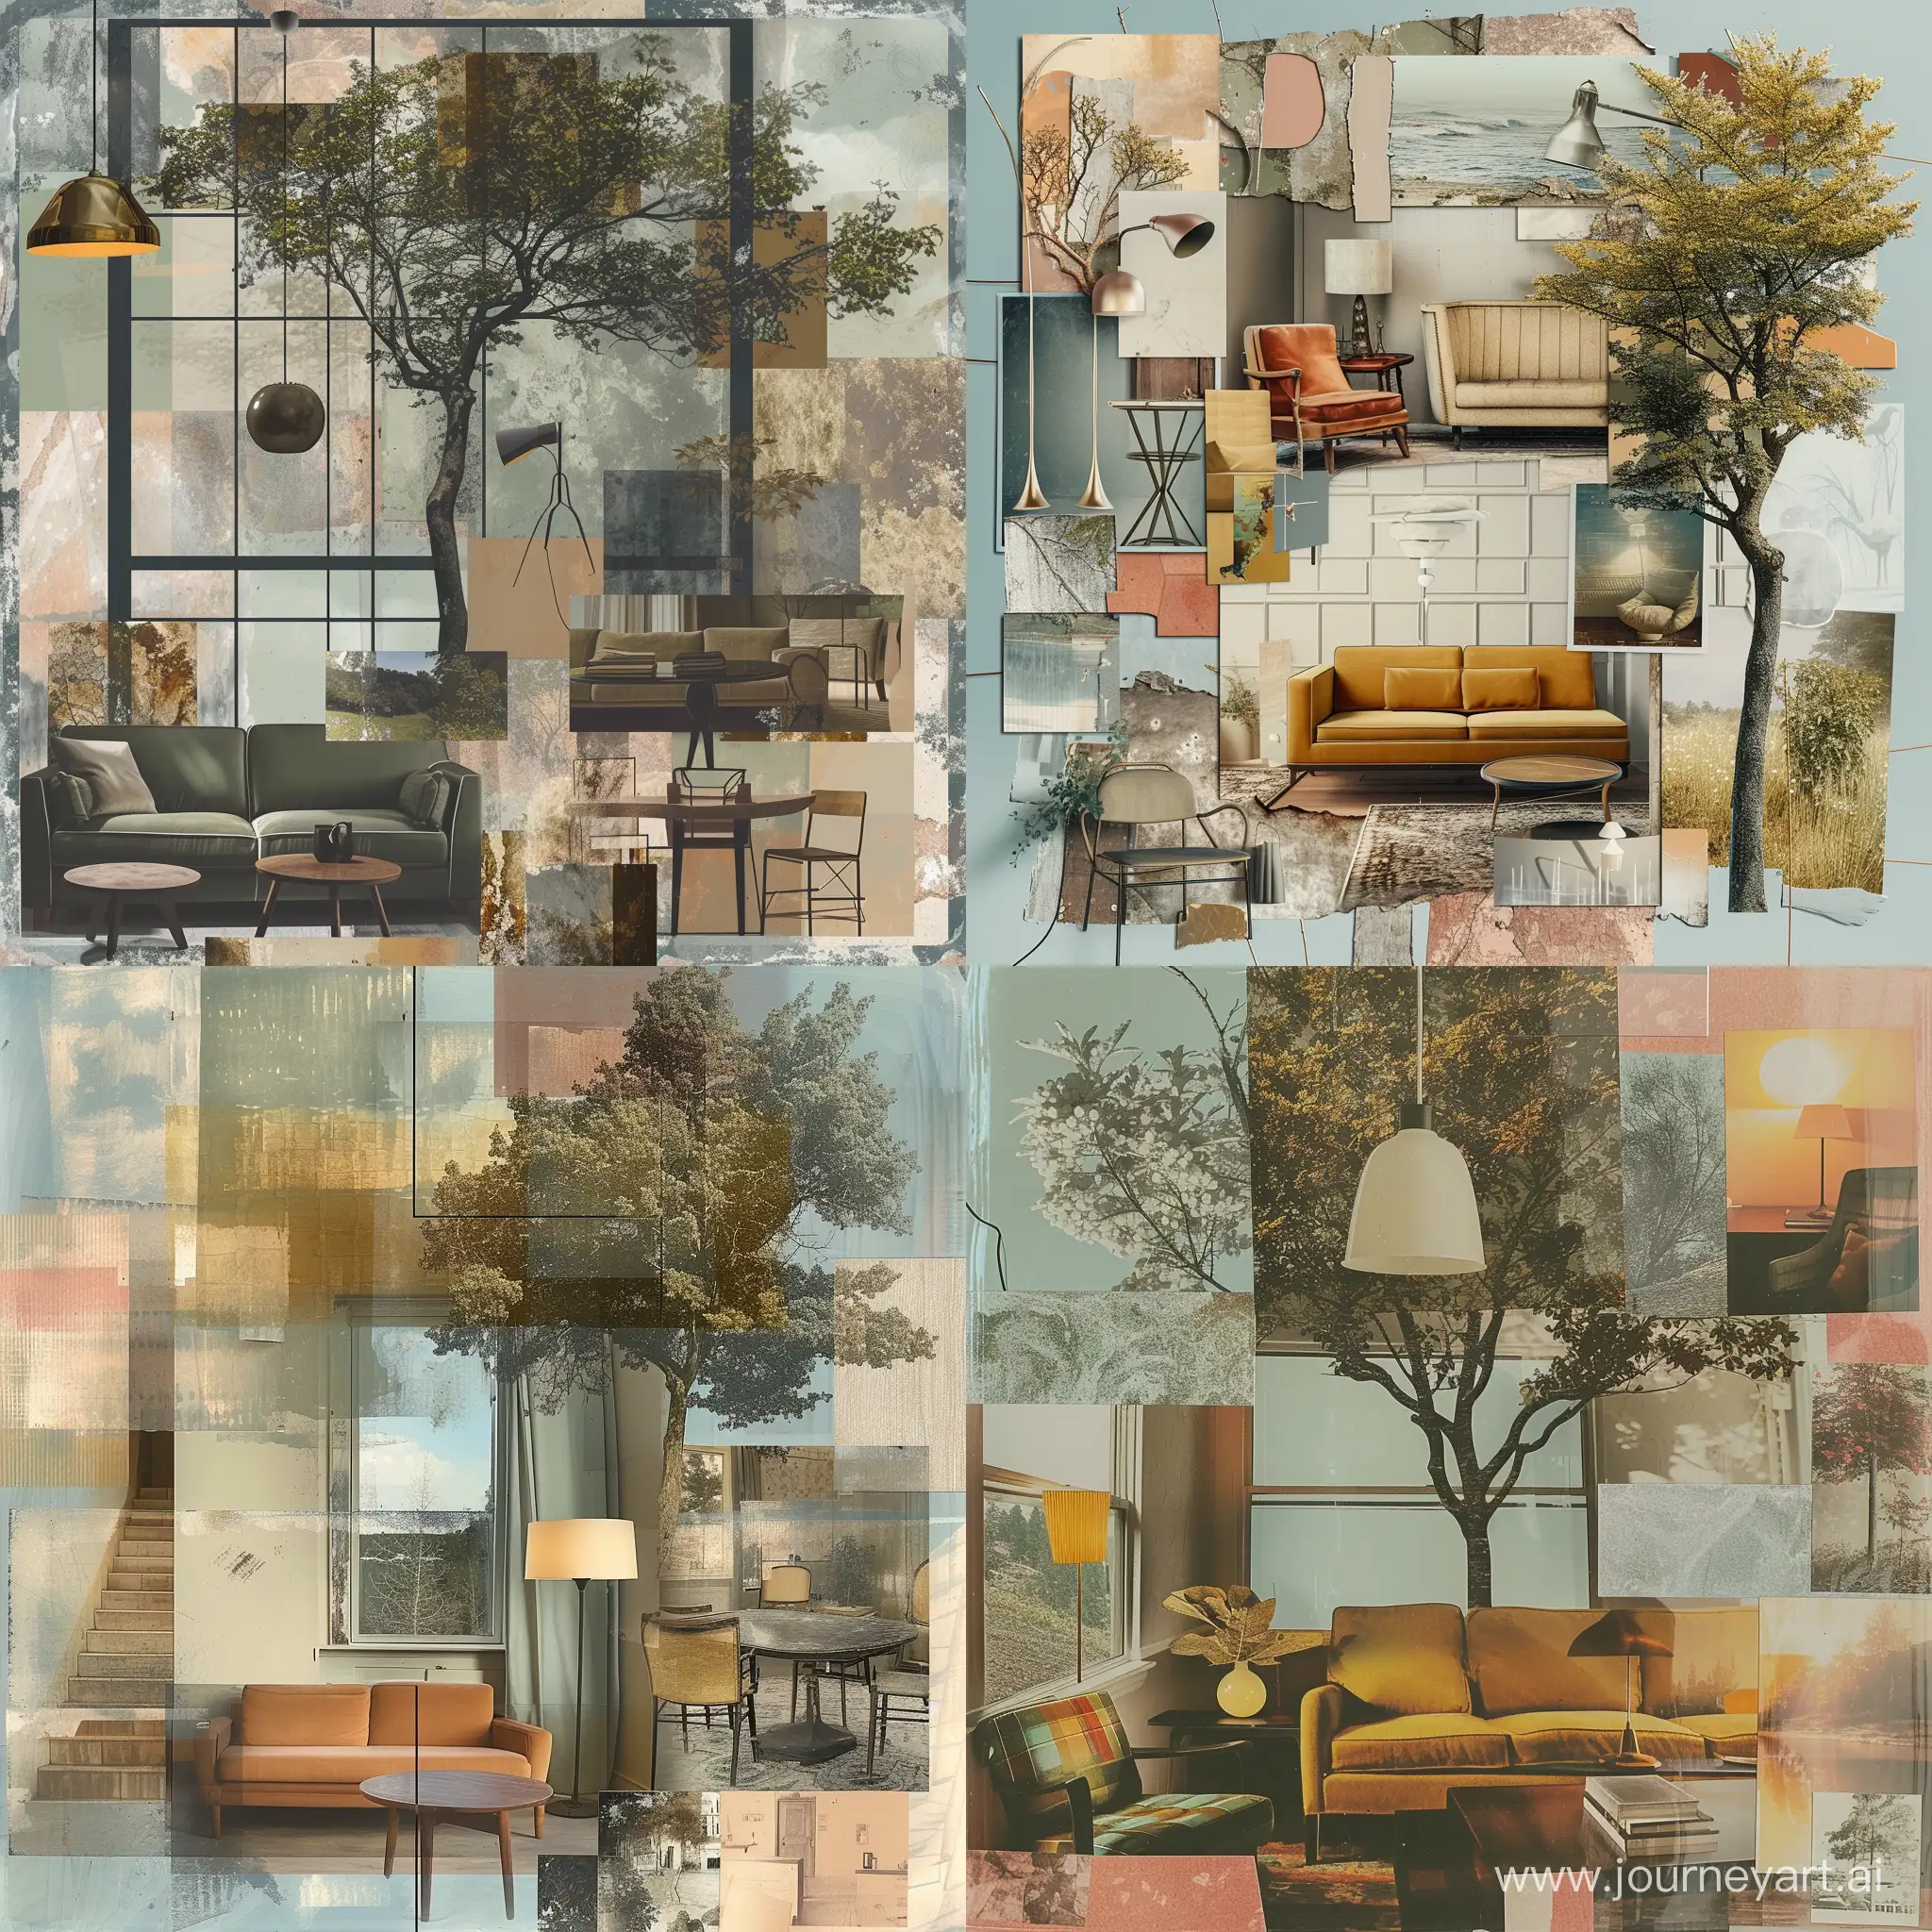 Cozy-Living-Room-Collage-with-Muted-Colors-and-Annabel-Kidston-Style